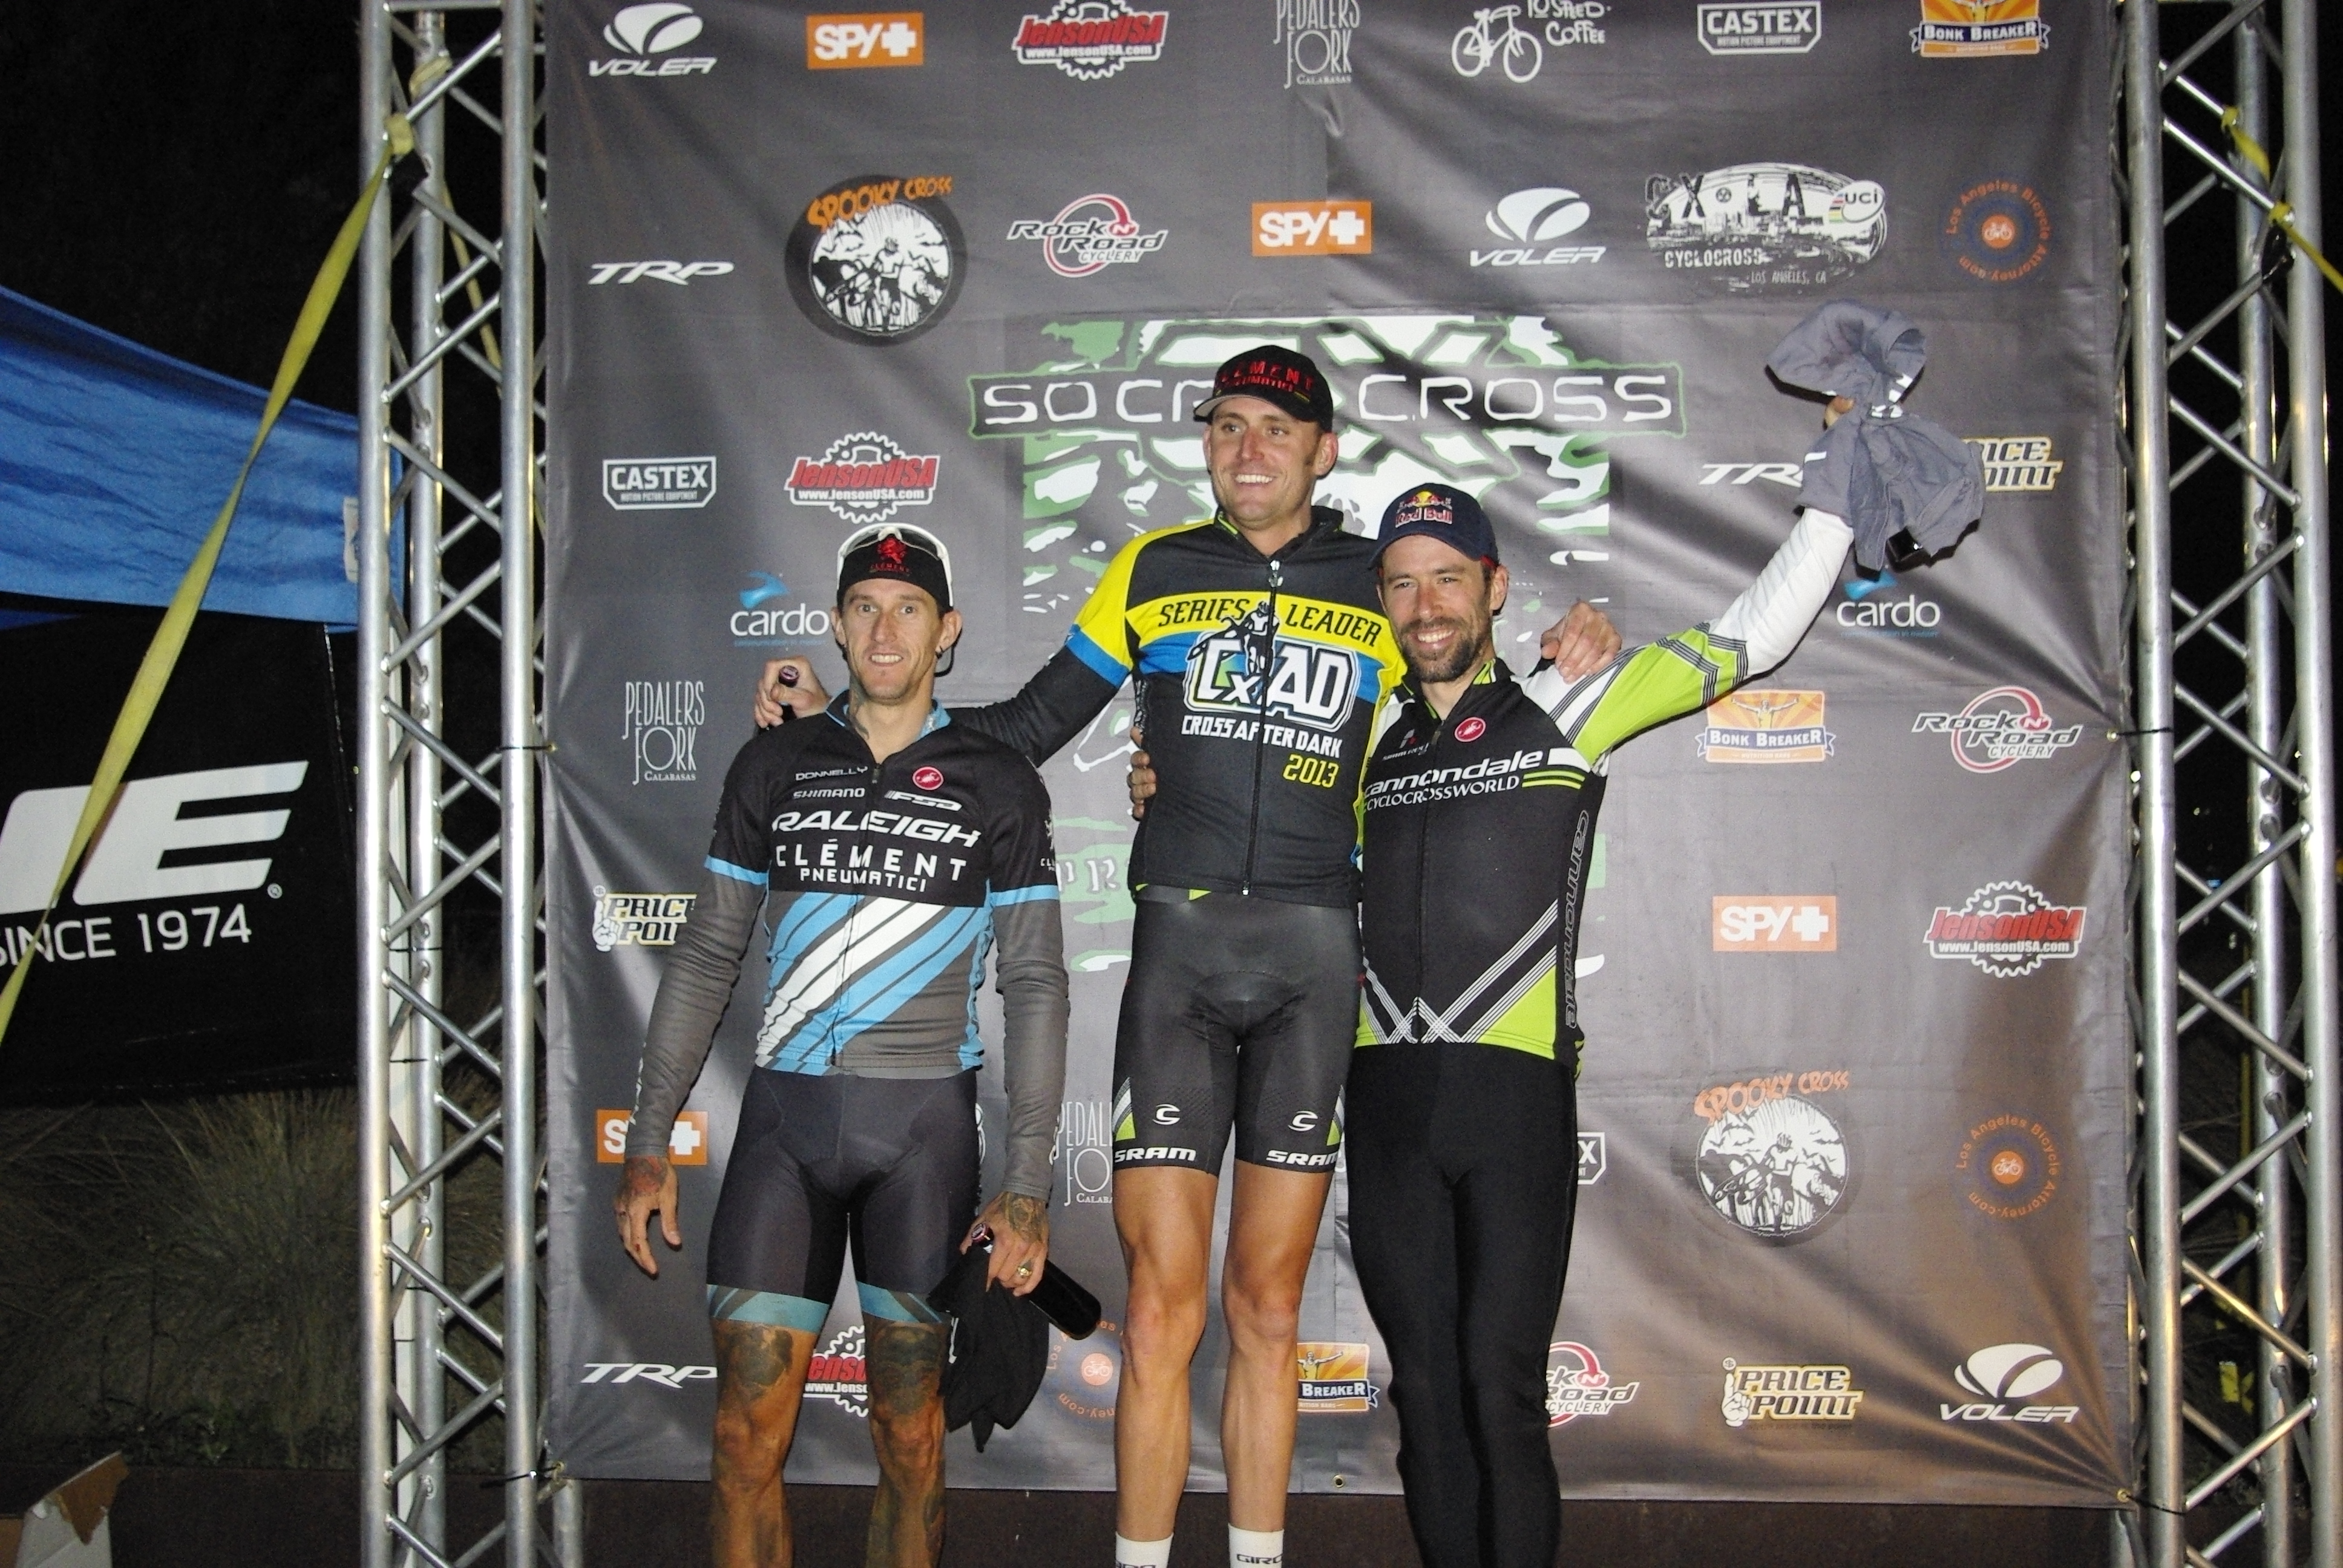 The Elite Men’s series leaders (L-R): Ben Berden (Raleigh-Clement), 2nd; Ryan Trebon (Canondale/Cyclocrossworld), 1st; Tim Johnson (Canondale/Cyclocrossworld), 3rd. © Kenneth Hill